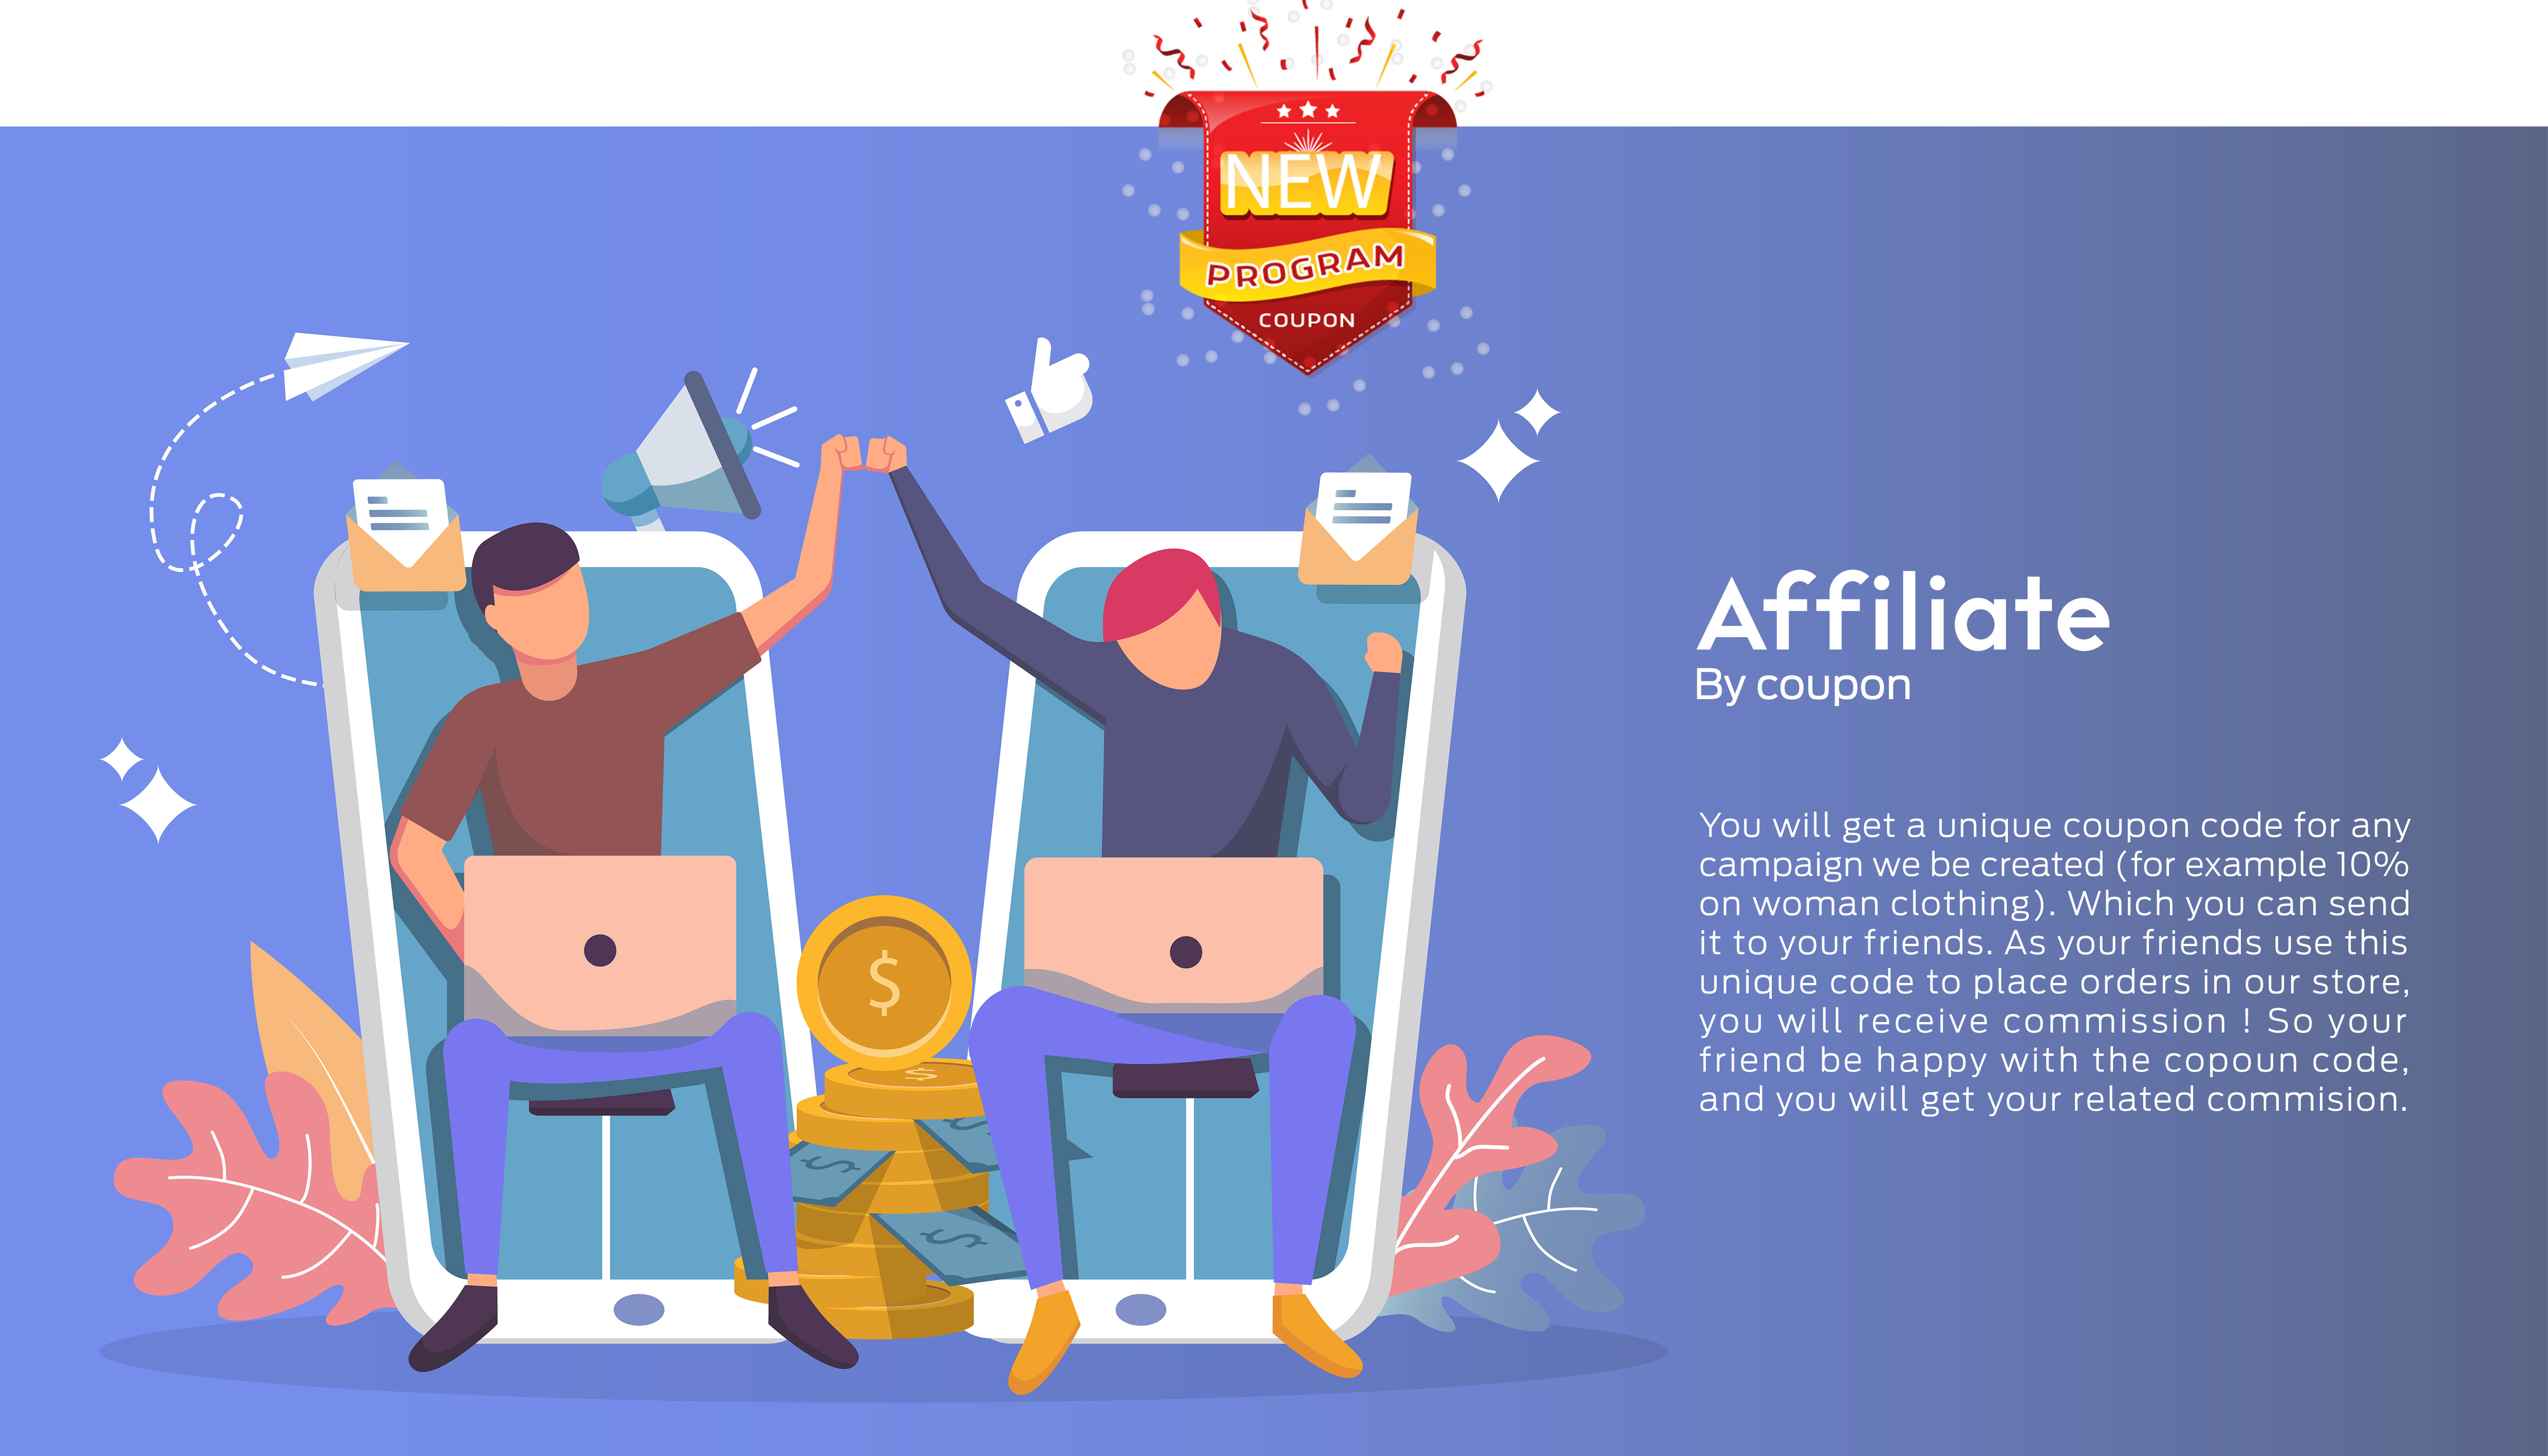 How the Affiliate Program works